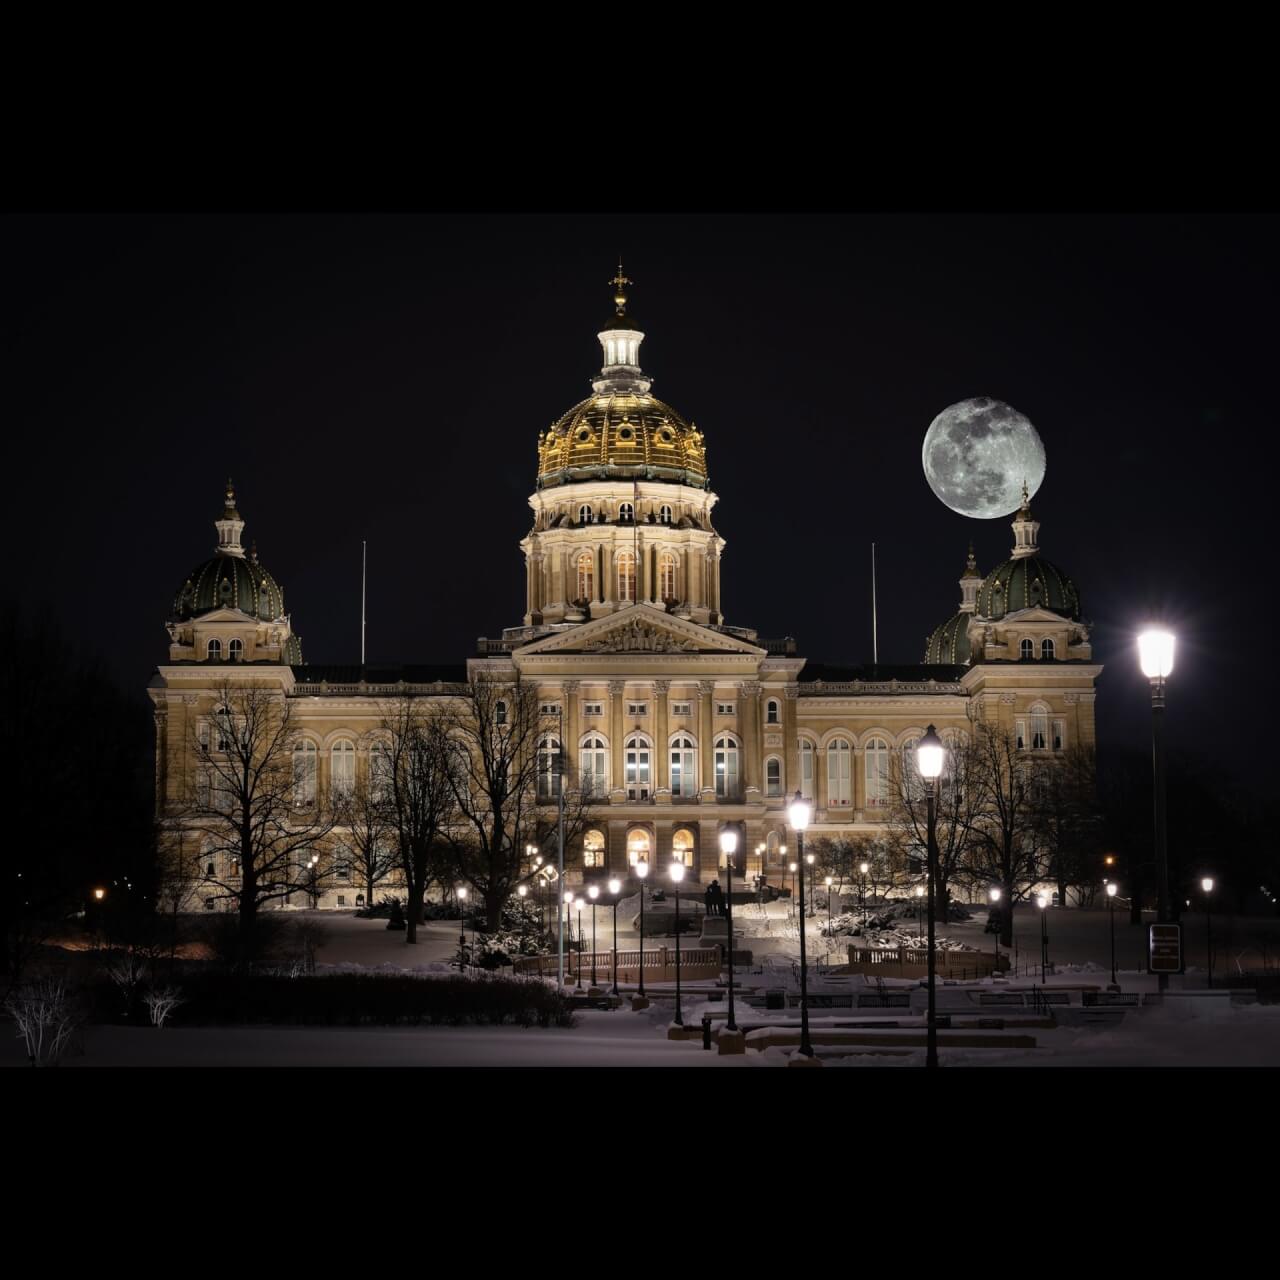 iowa state capitol with full moon in background